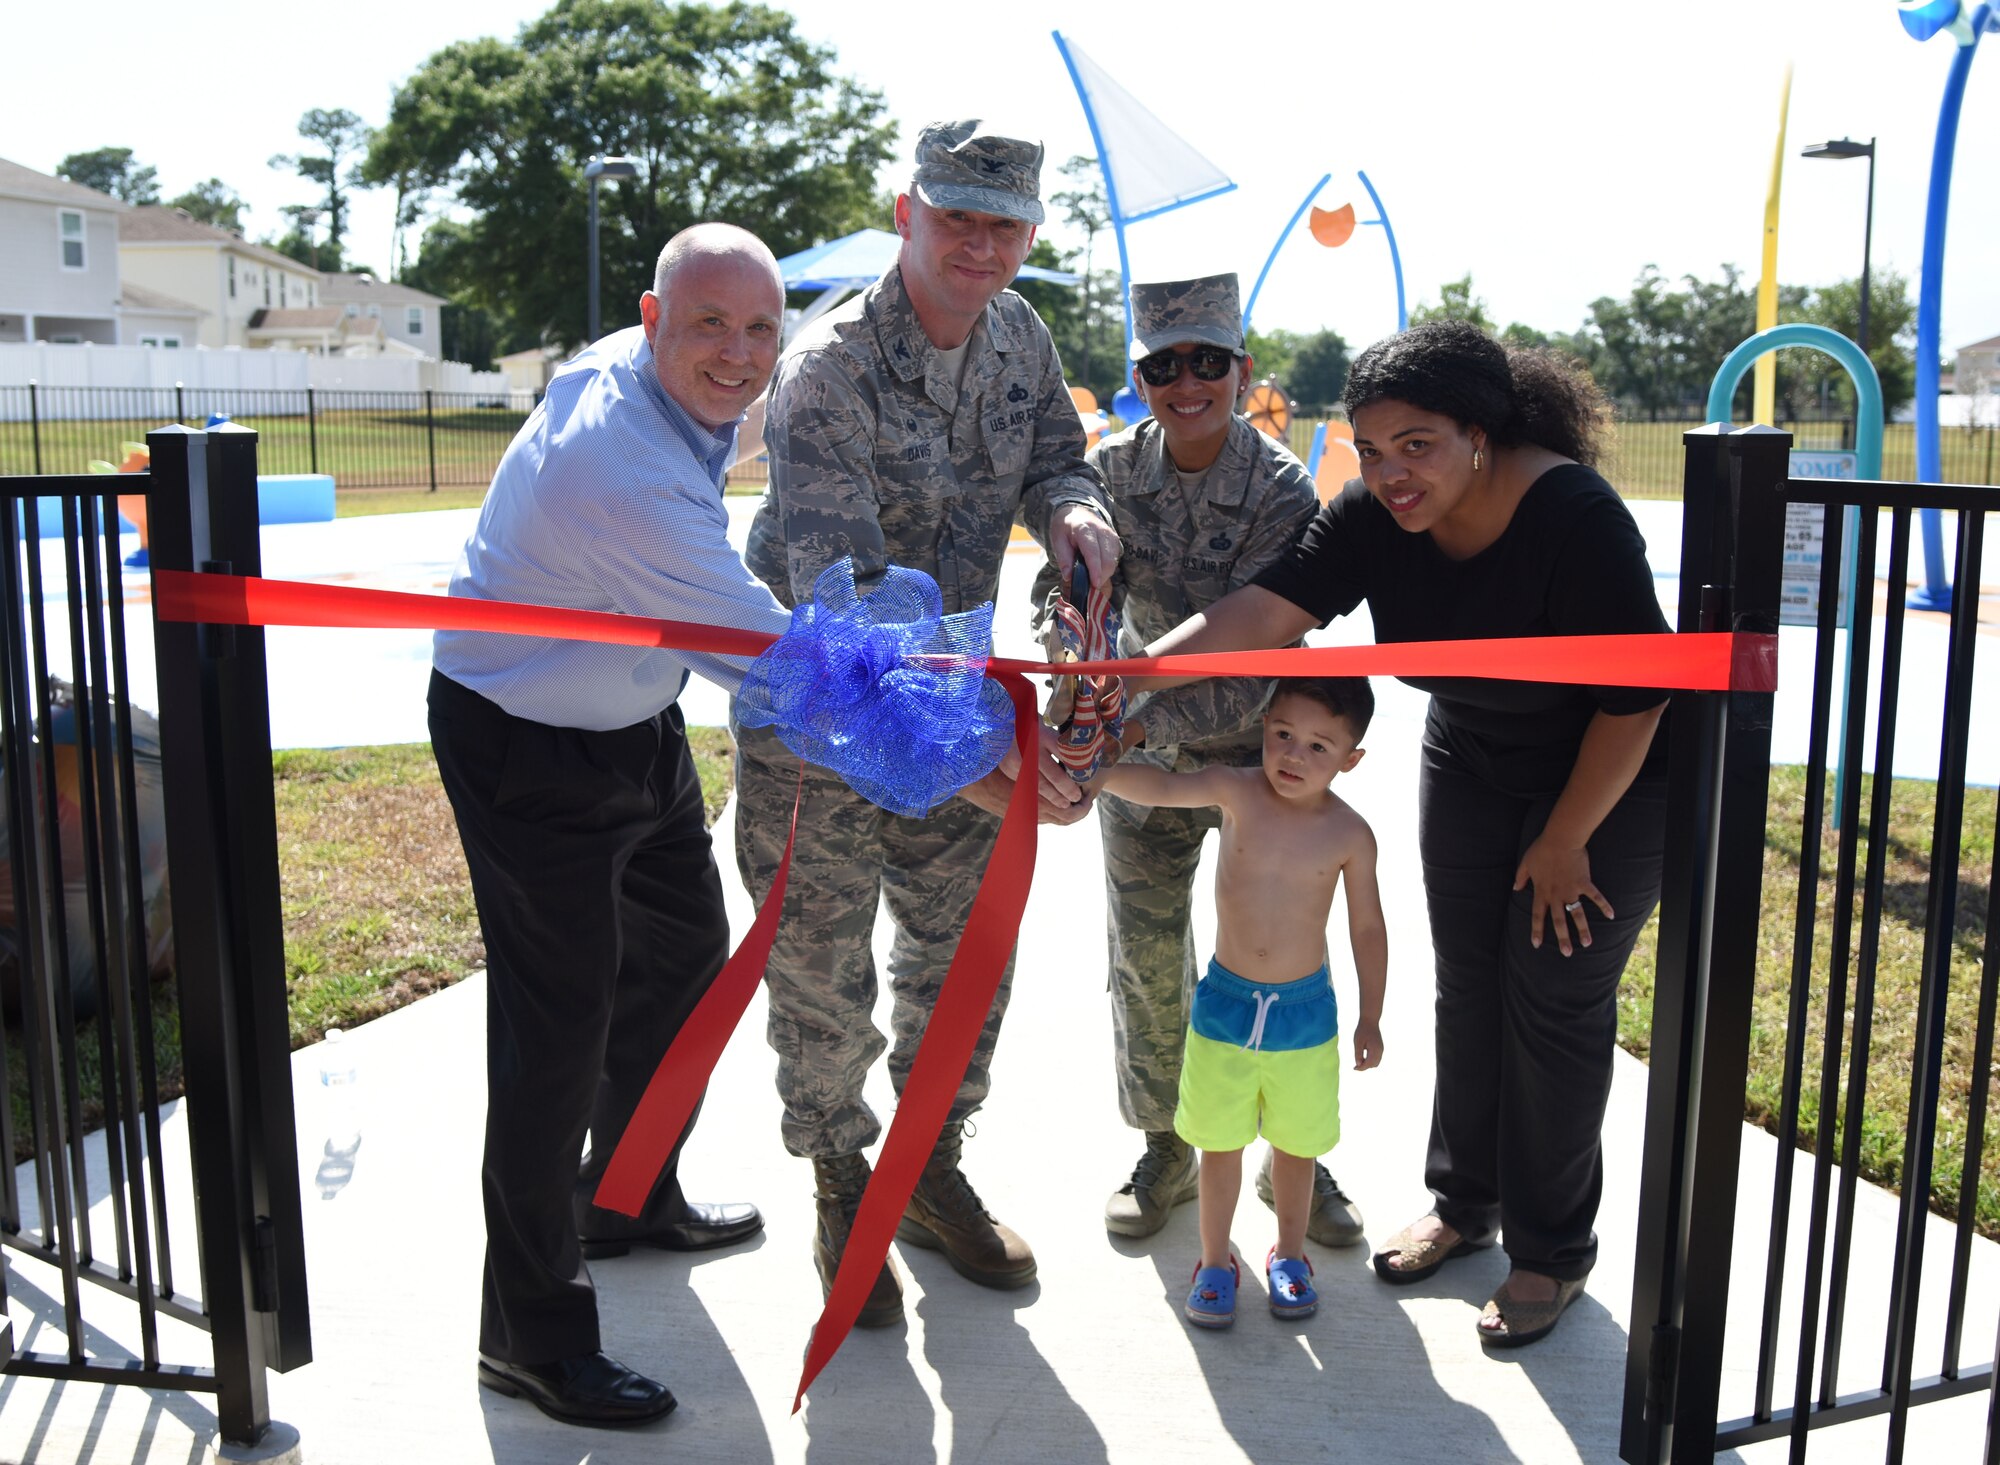 U.S. Air Force Col. Danny Davis, 81st Mission Support Group commander,  helps cut a ribbon during the Splash Pad Ribbon Cutting Ceremony at the West Falcon Housing area in Biloxi, Mississippi, May 22, 2018. The Hunt Company project will provide more recreational activities for all Keesler family housing families. (U.S. Air Force photo by Kemberly Groue)